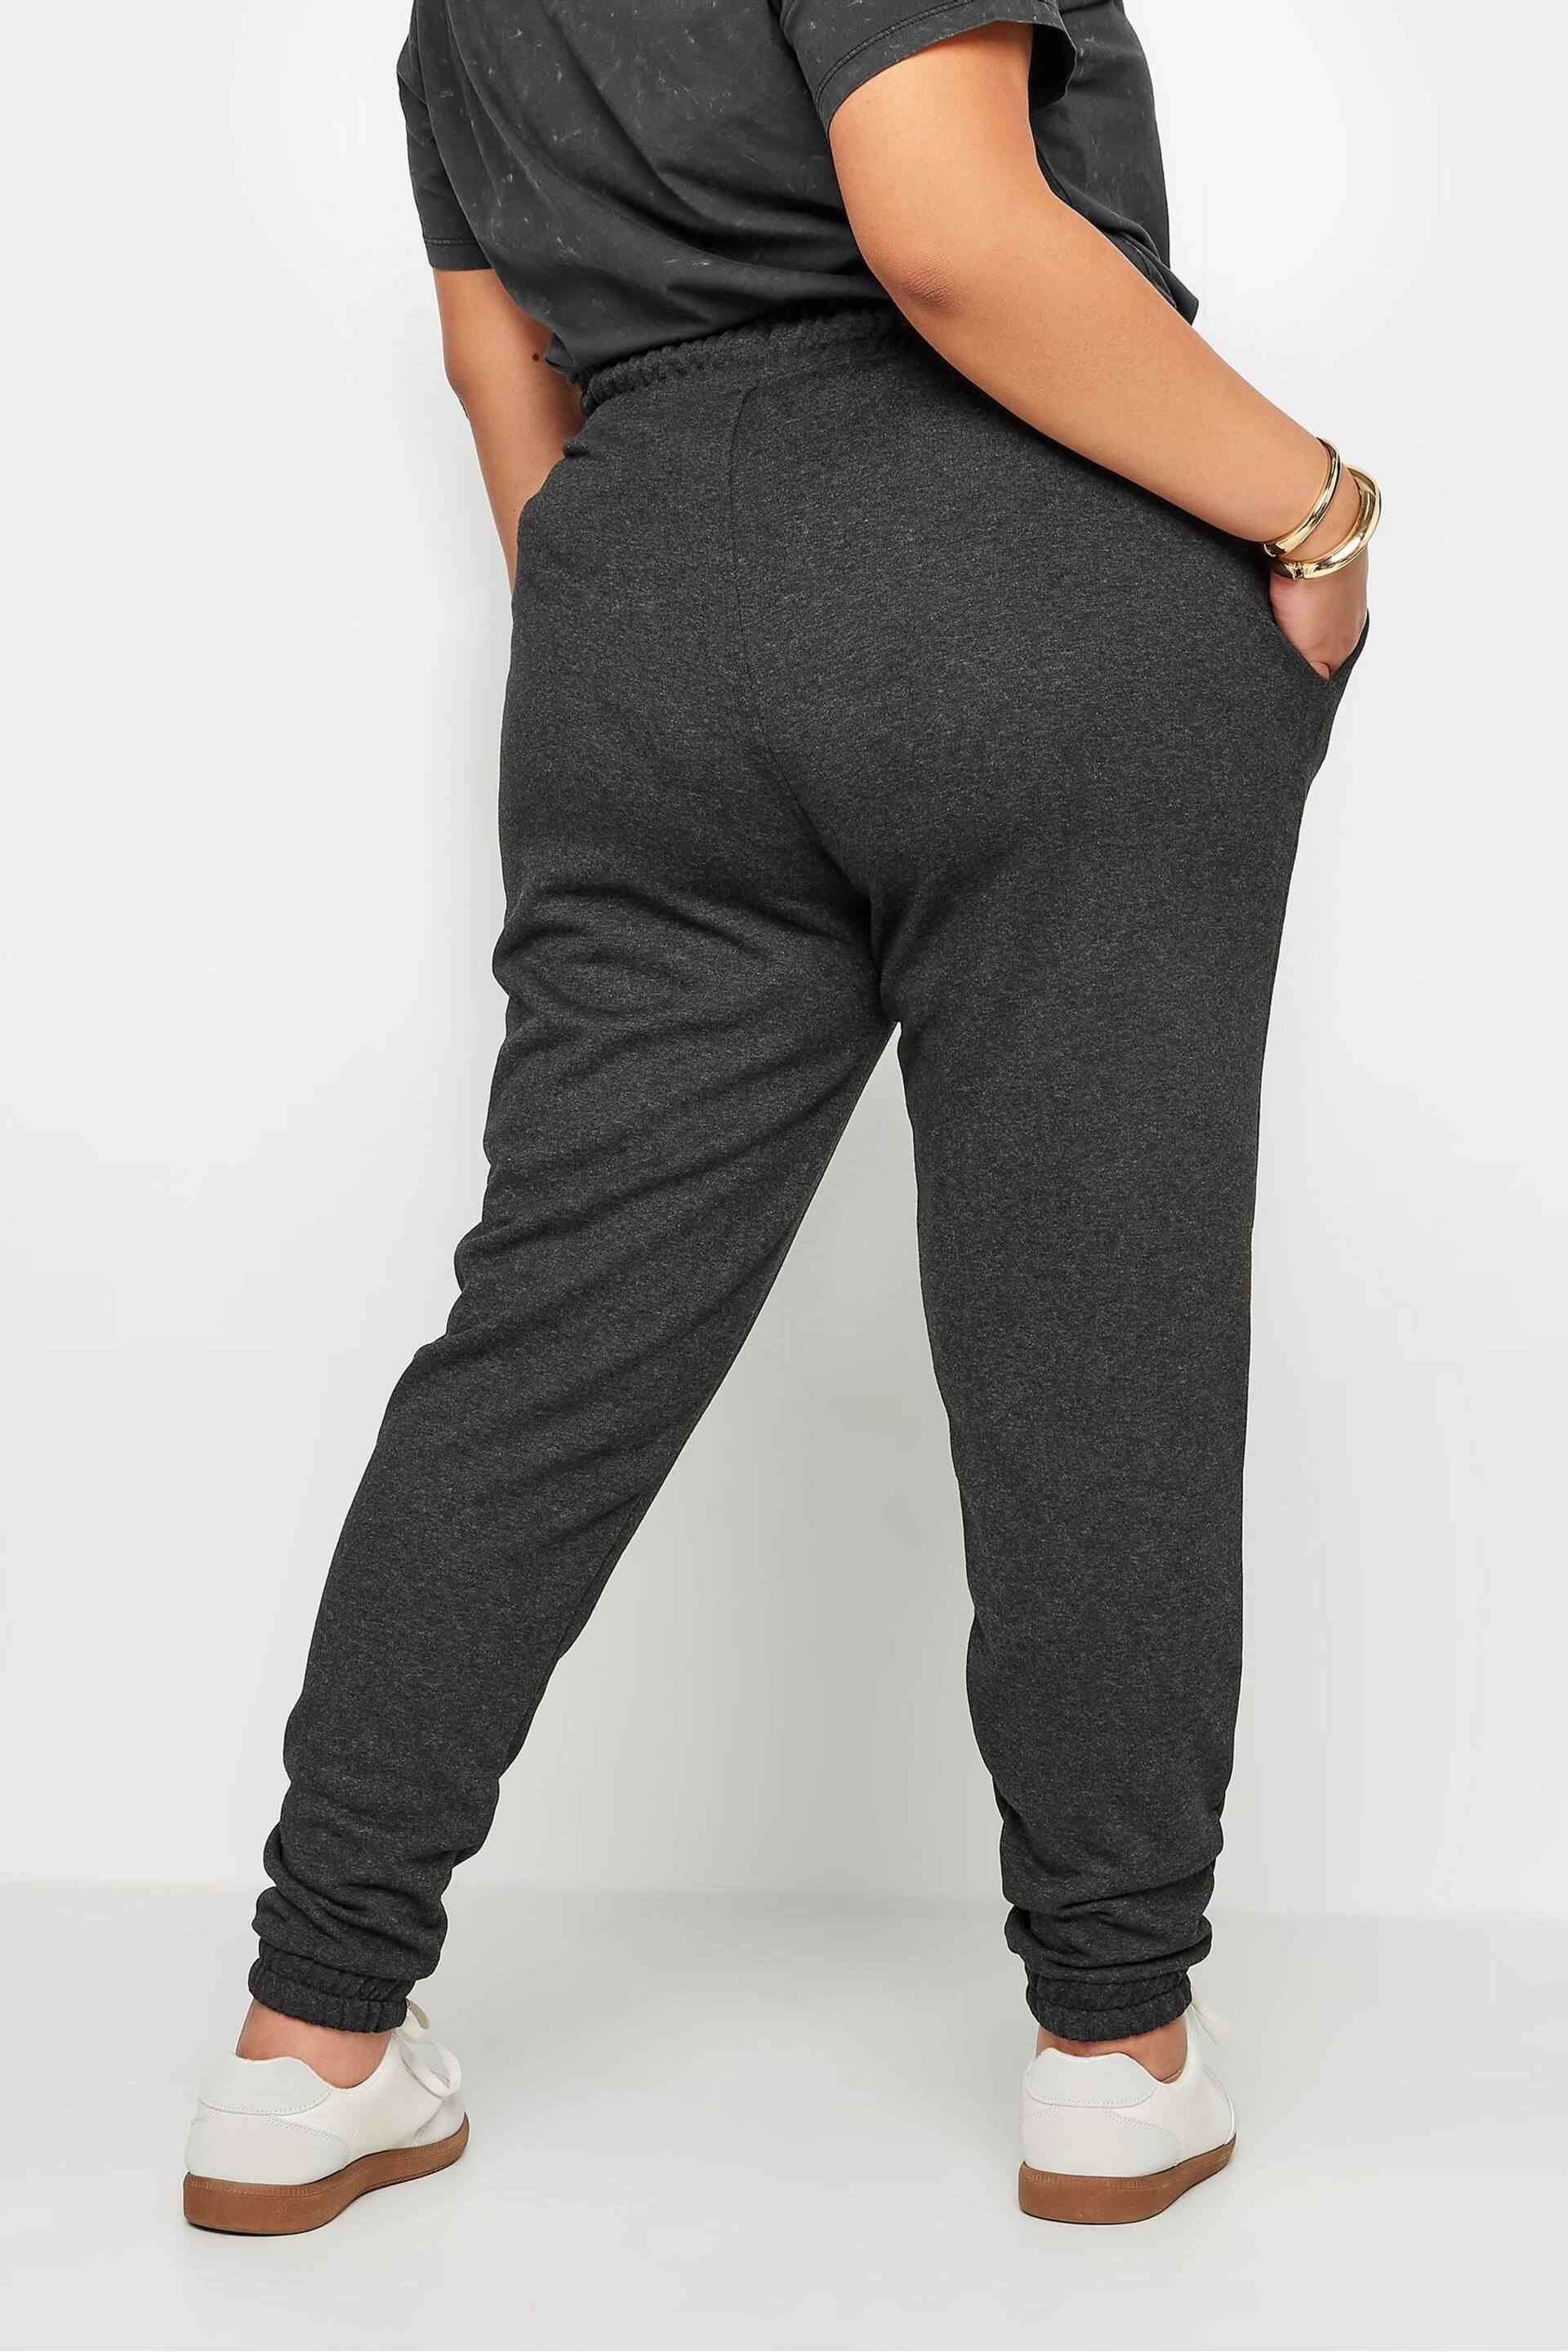 Yours Curve Grey Elasticated Stretch Joggers - Image 3 of 5